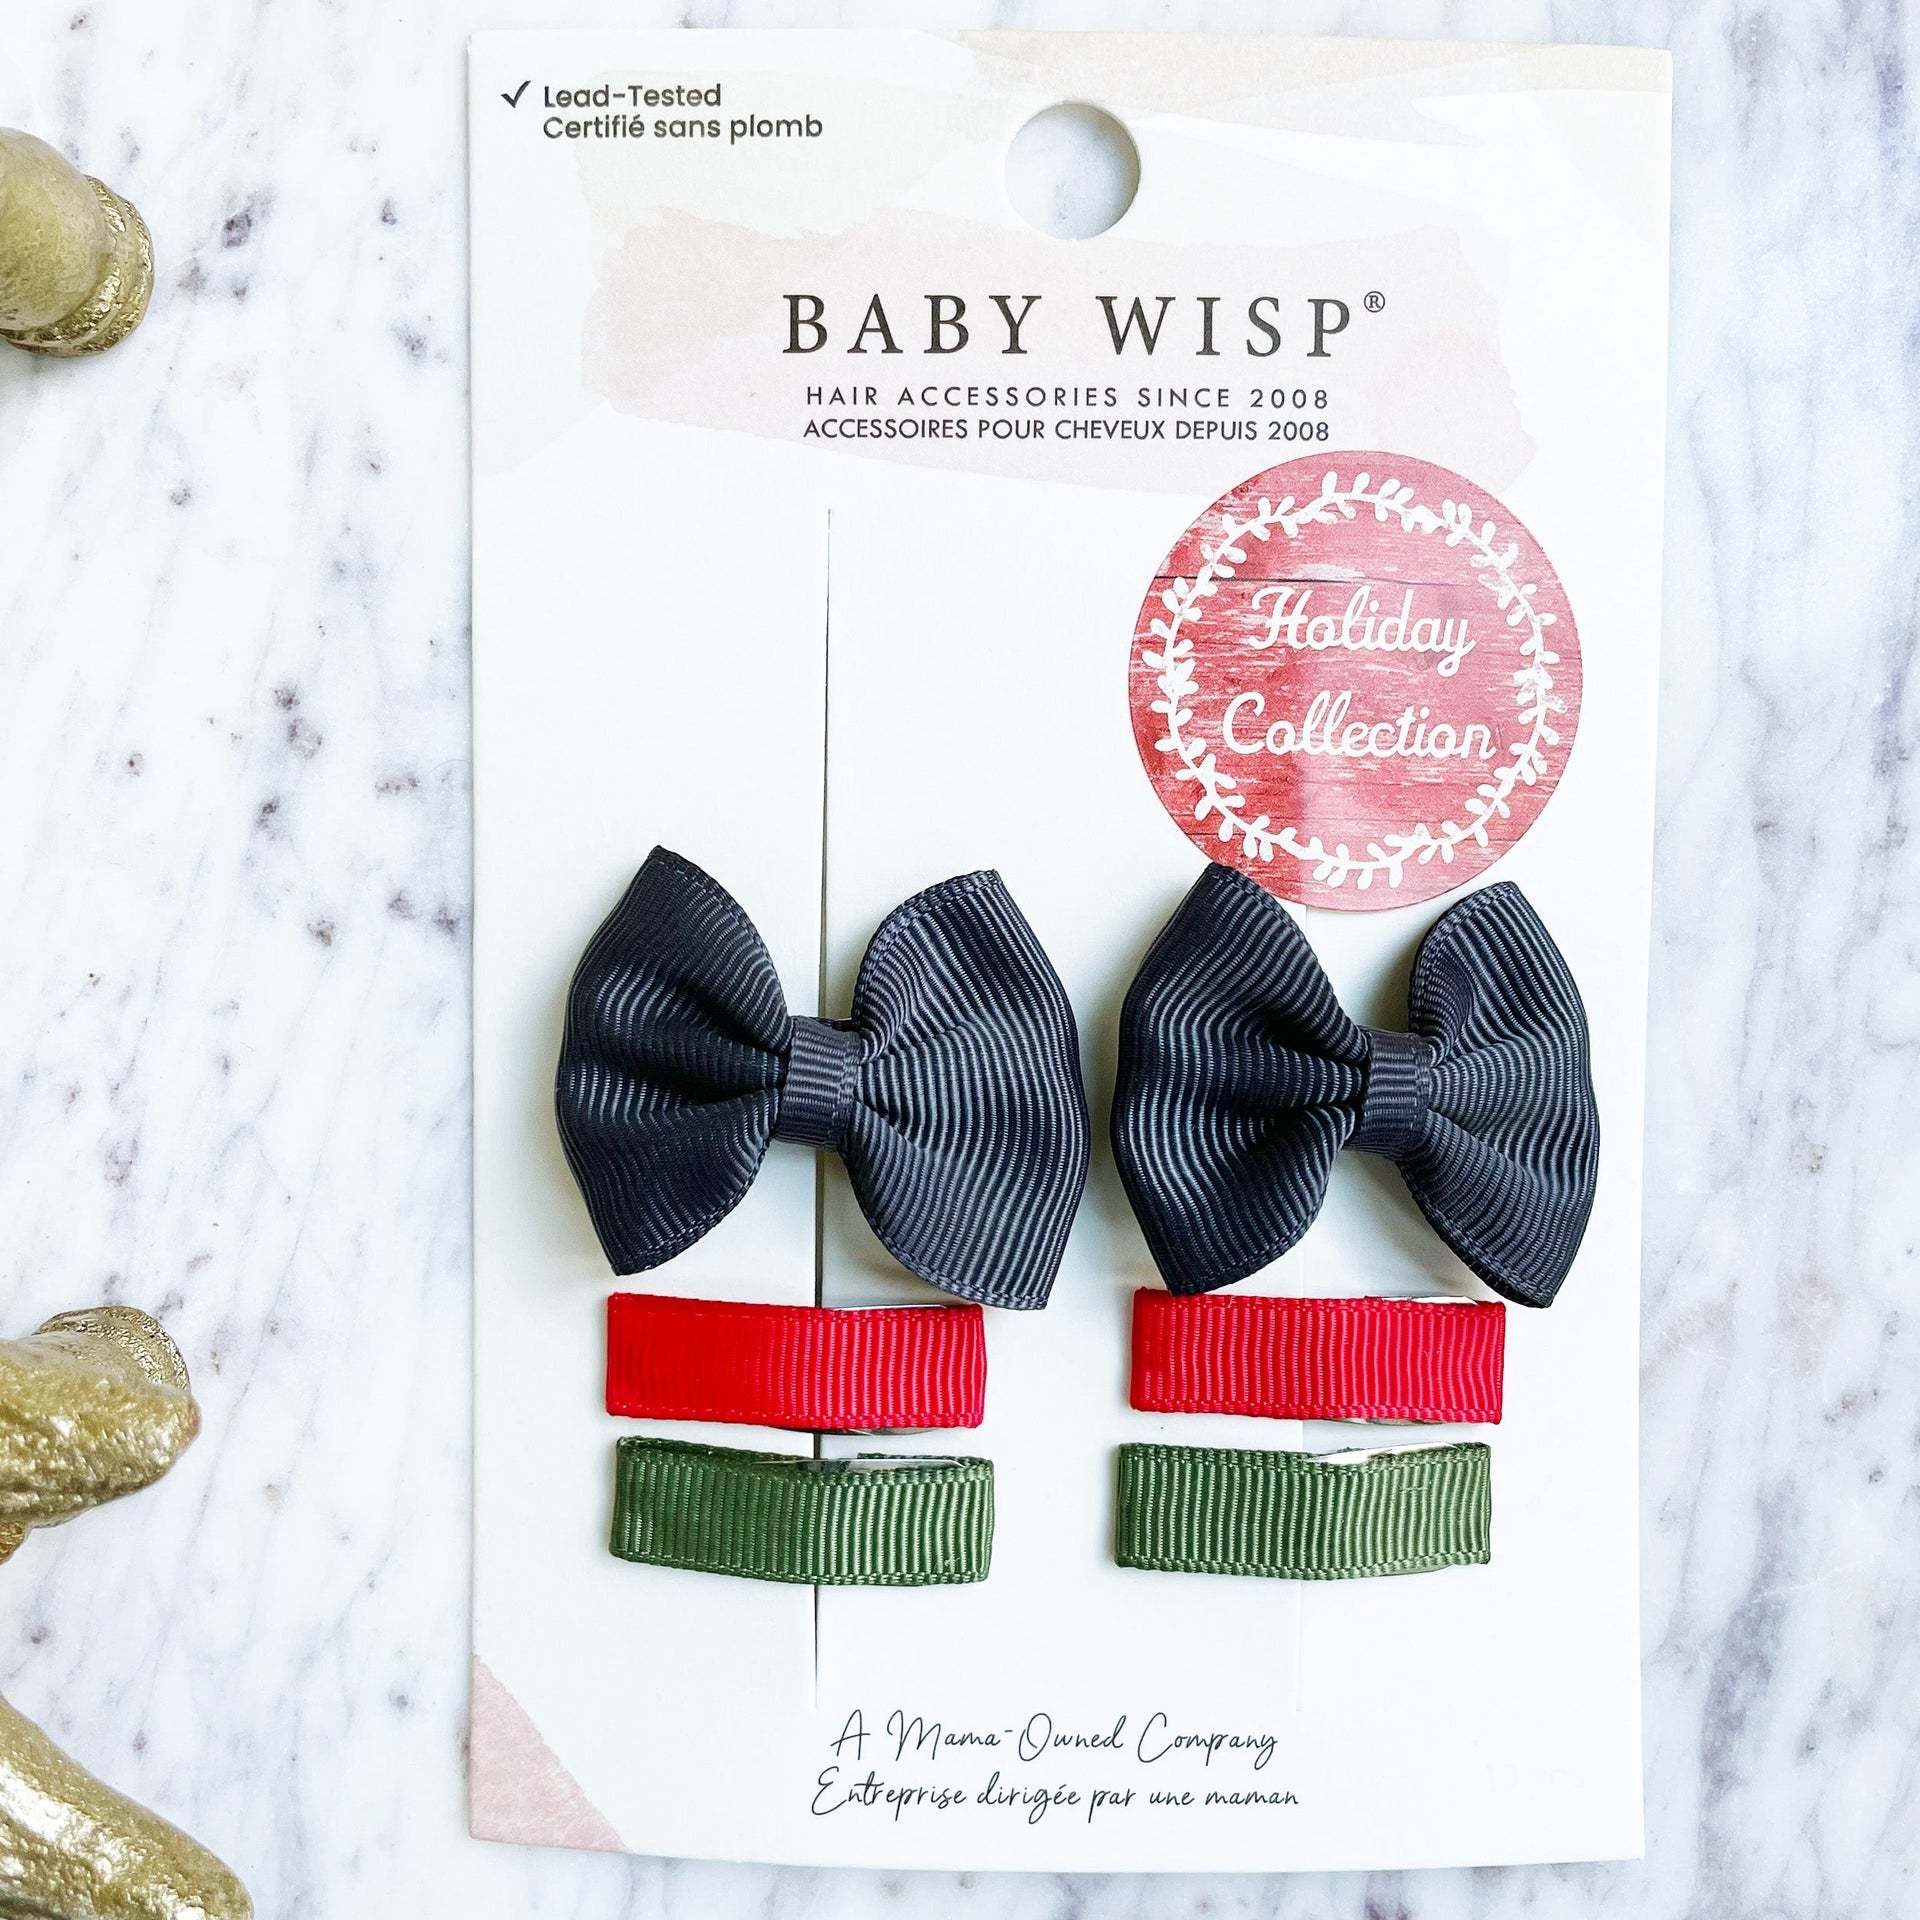 Charcoal Classic Ribbon Hair Bows and Simple Ribbon Clips - 6 Pc Christmas Baby Bow Gift Set Baby Wisp